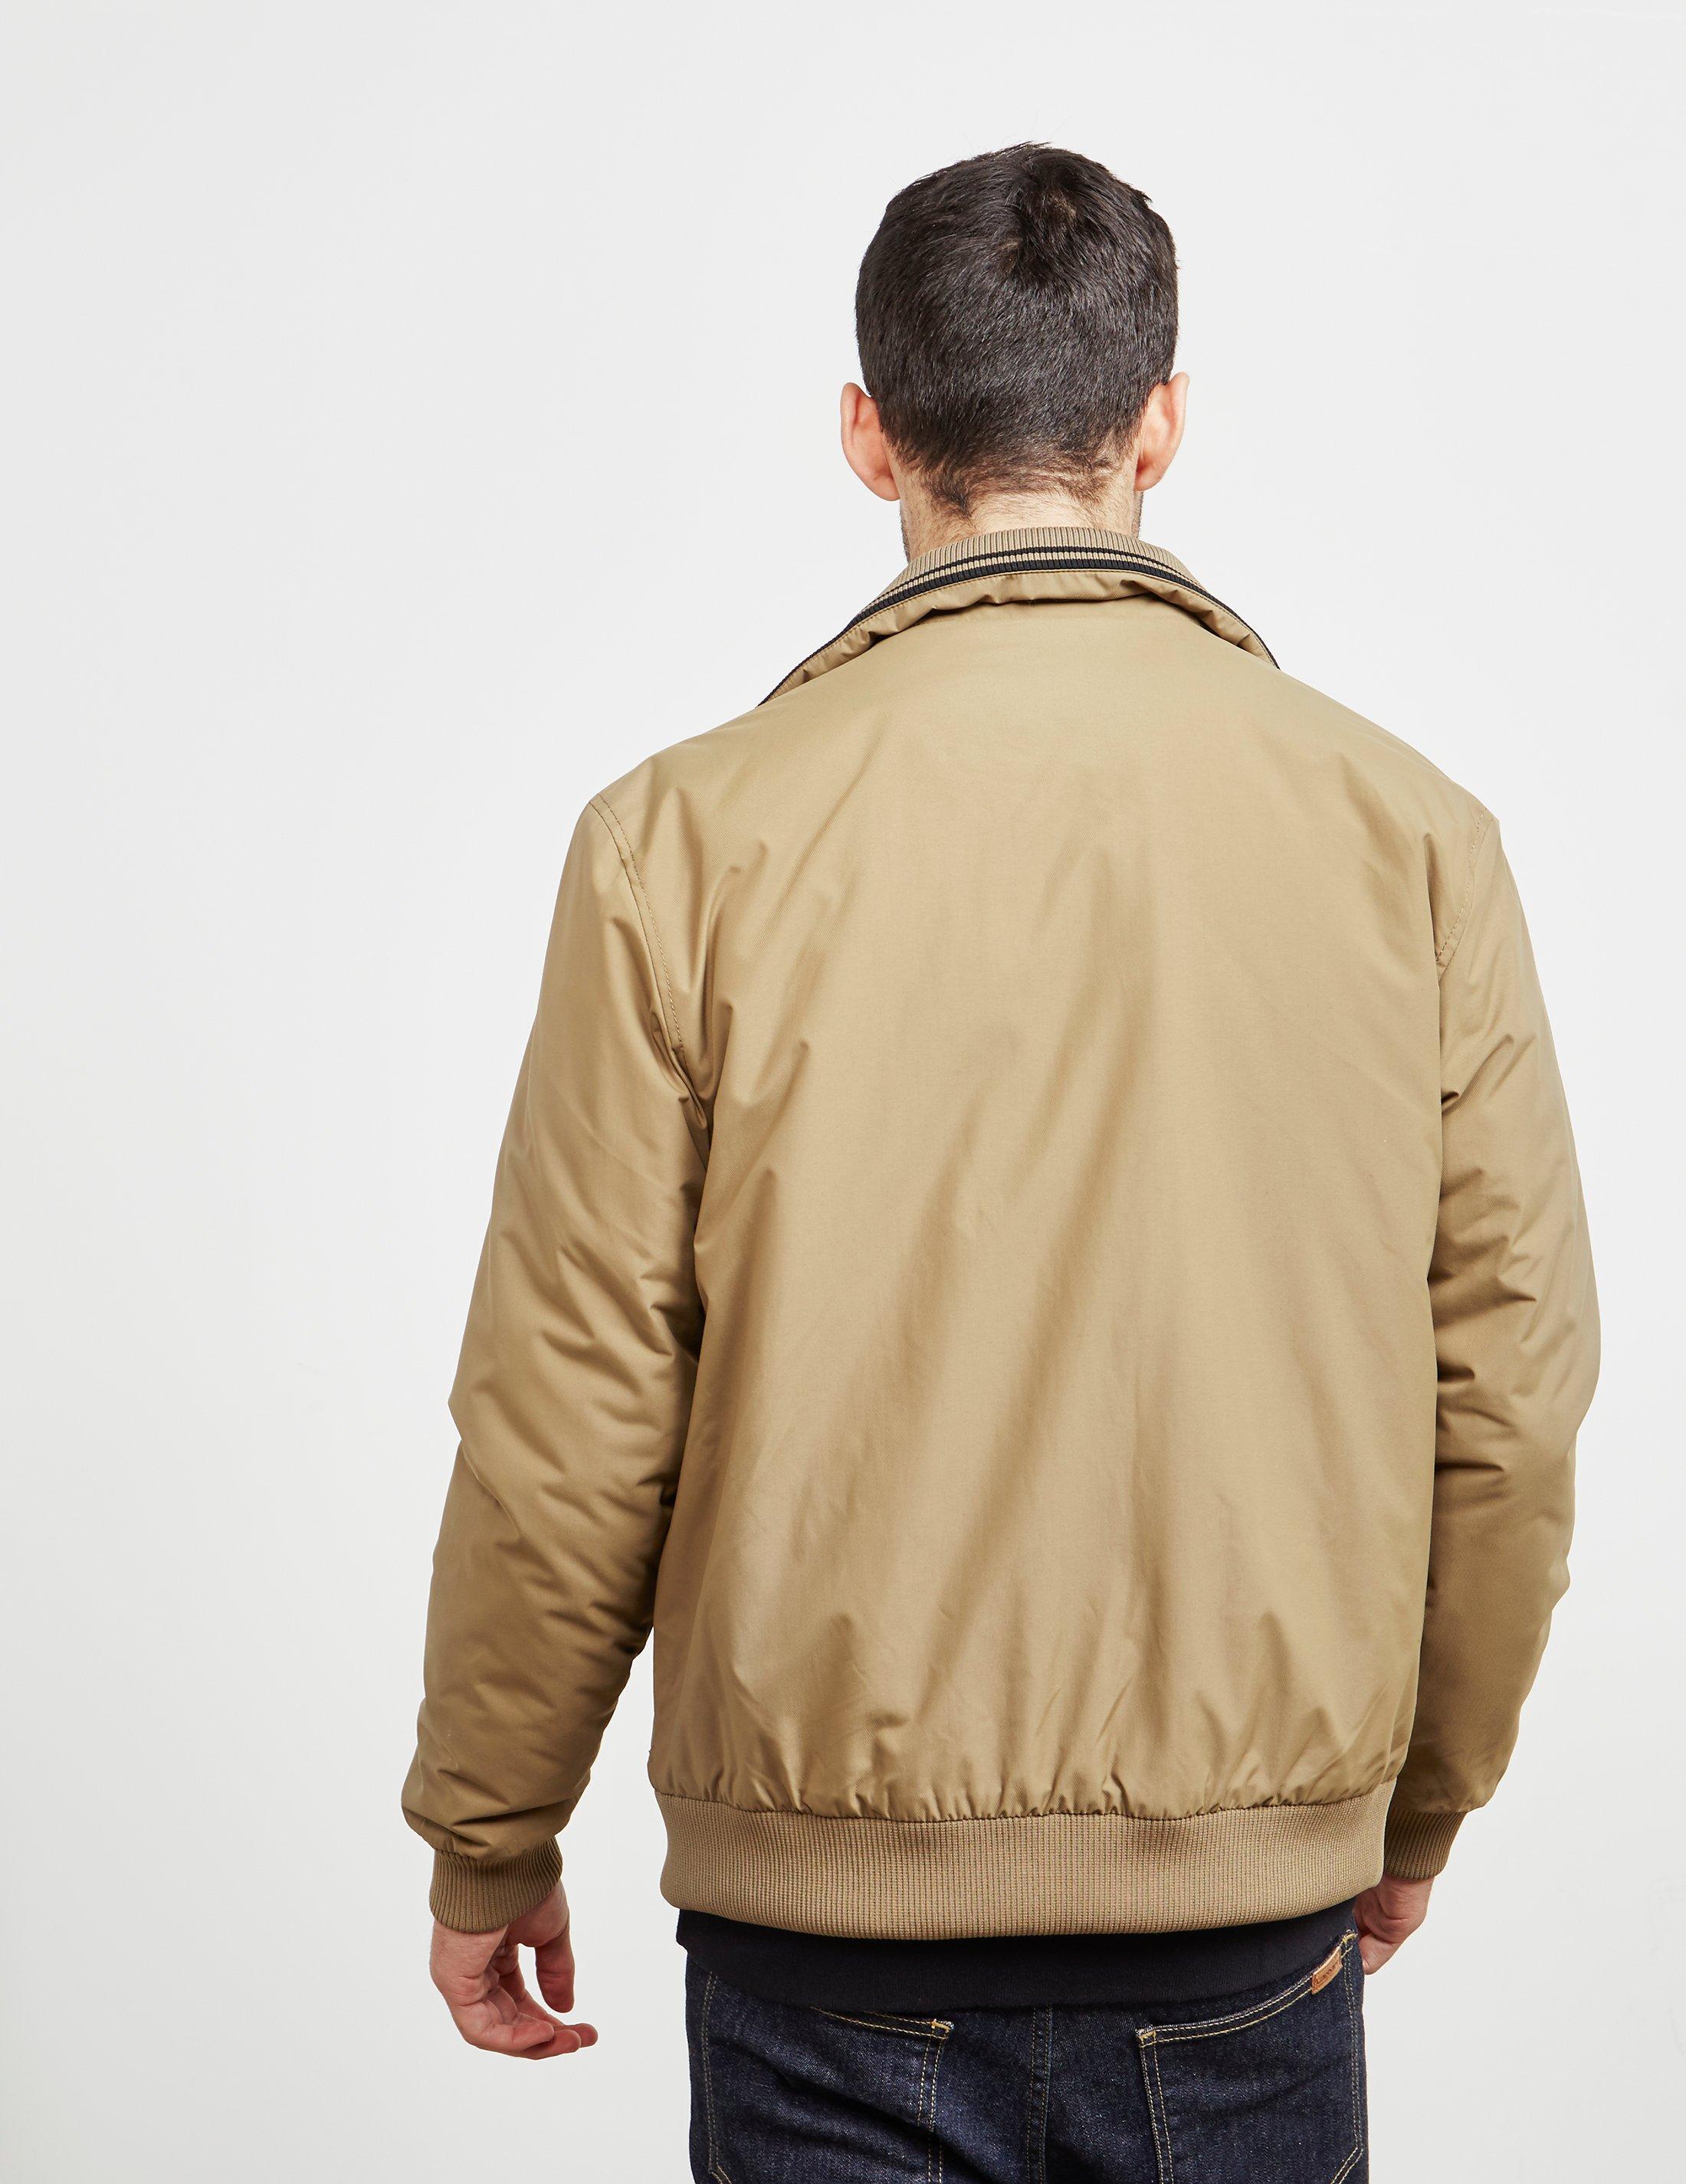 Fred Perry Synthetic Utility Bomber Jacket Khaki in Natural for Men - Lyst